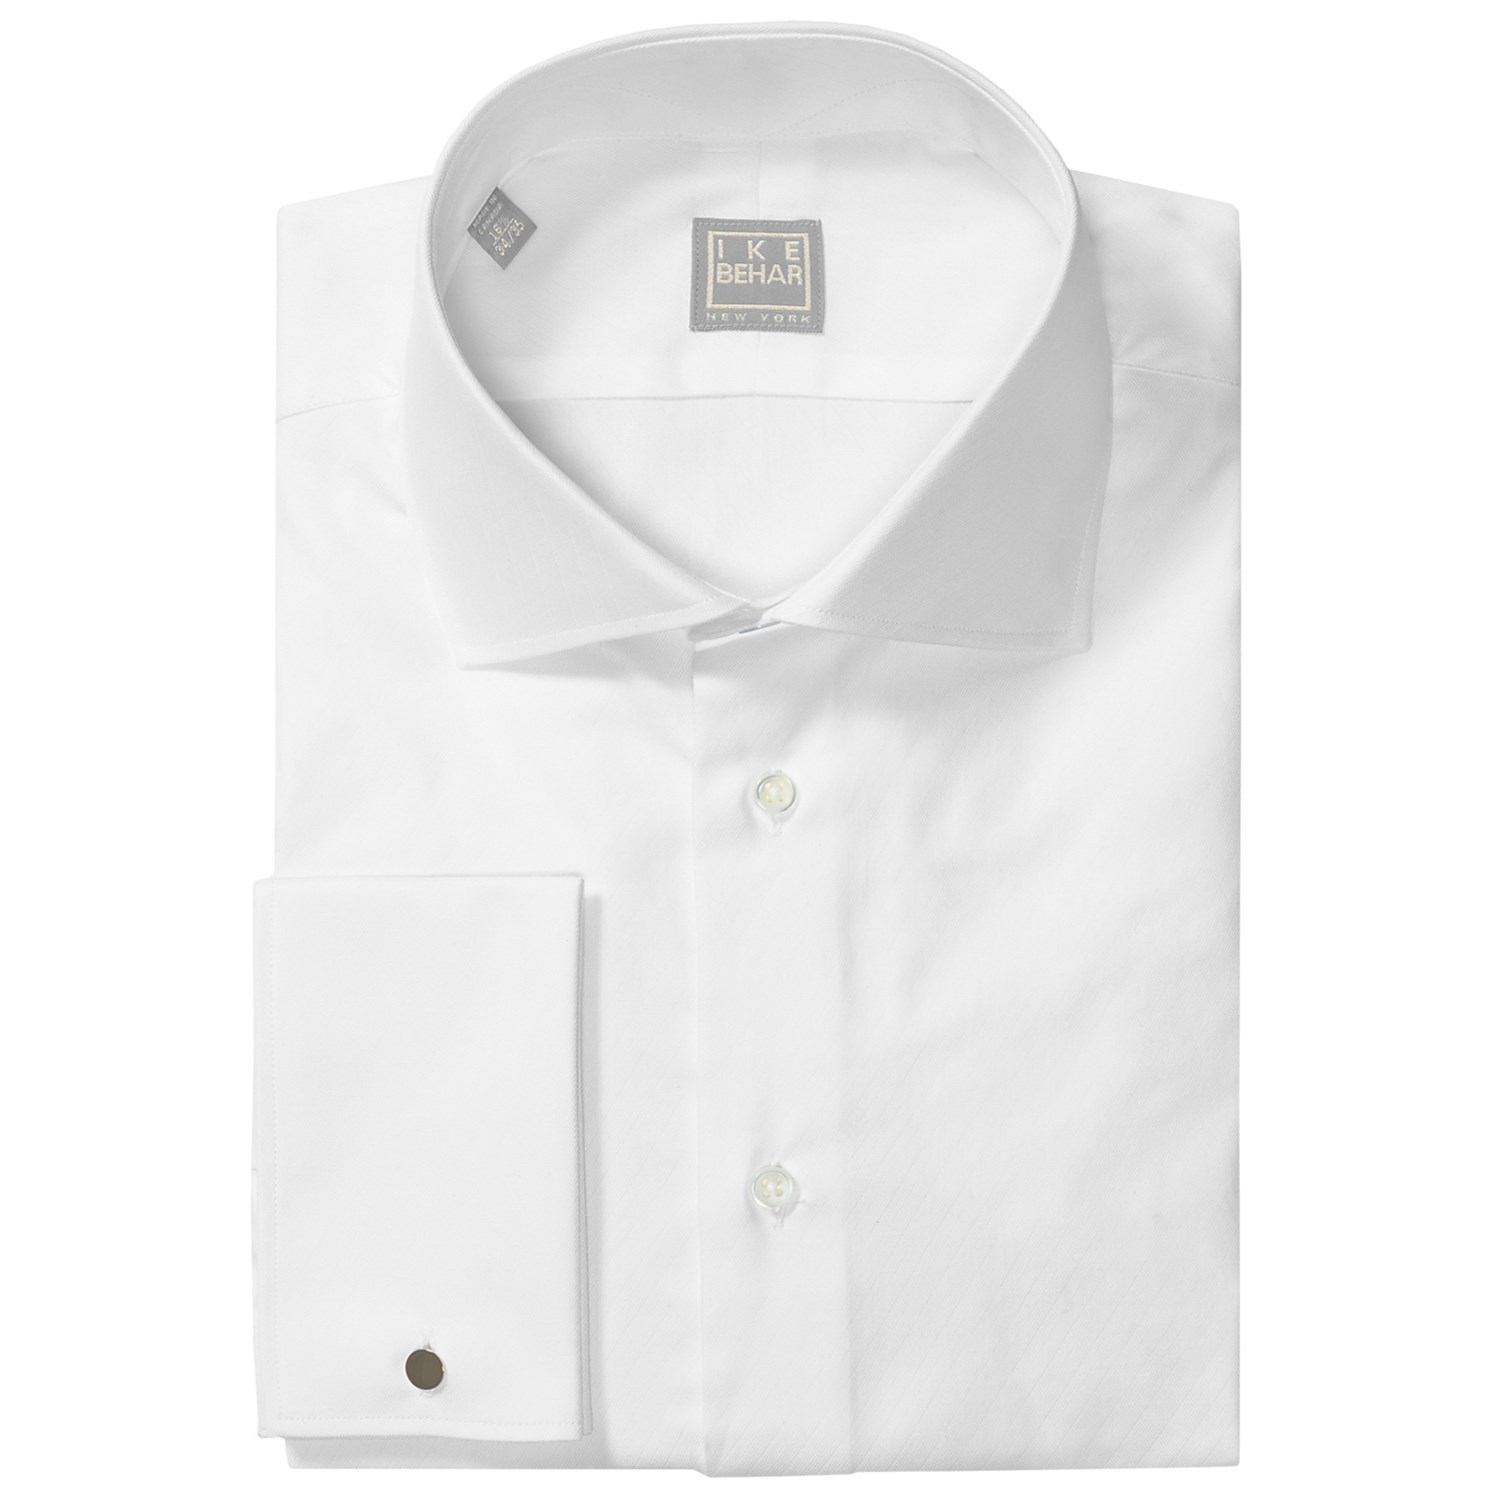 Ike Behar Gold Label French Cuff Shirt - Long Sleeve (For Men) - Save 33%